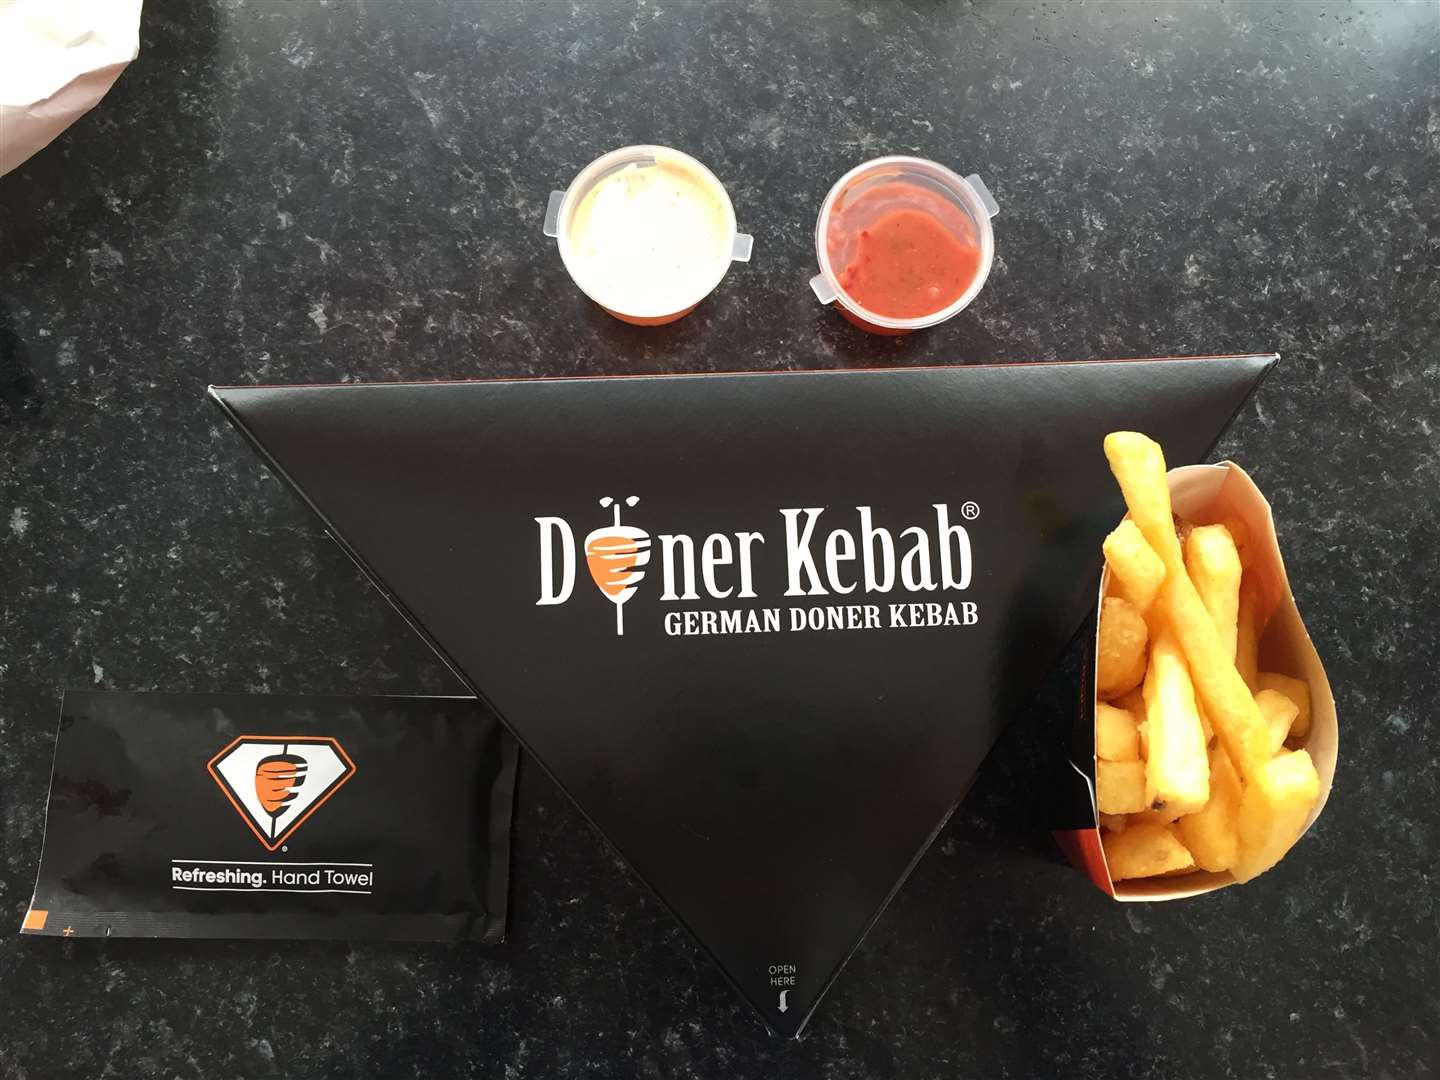 The German Doner Kebab, with fries and sauces